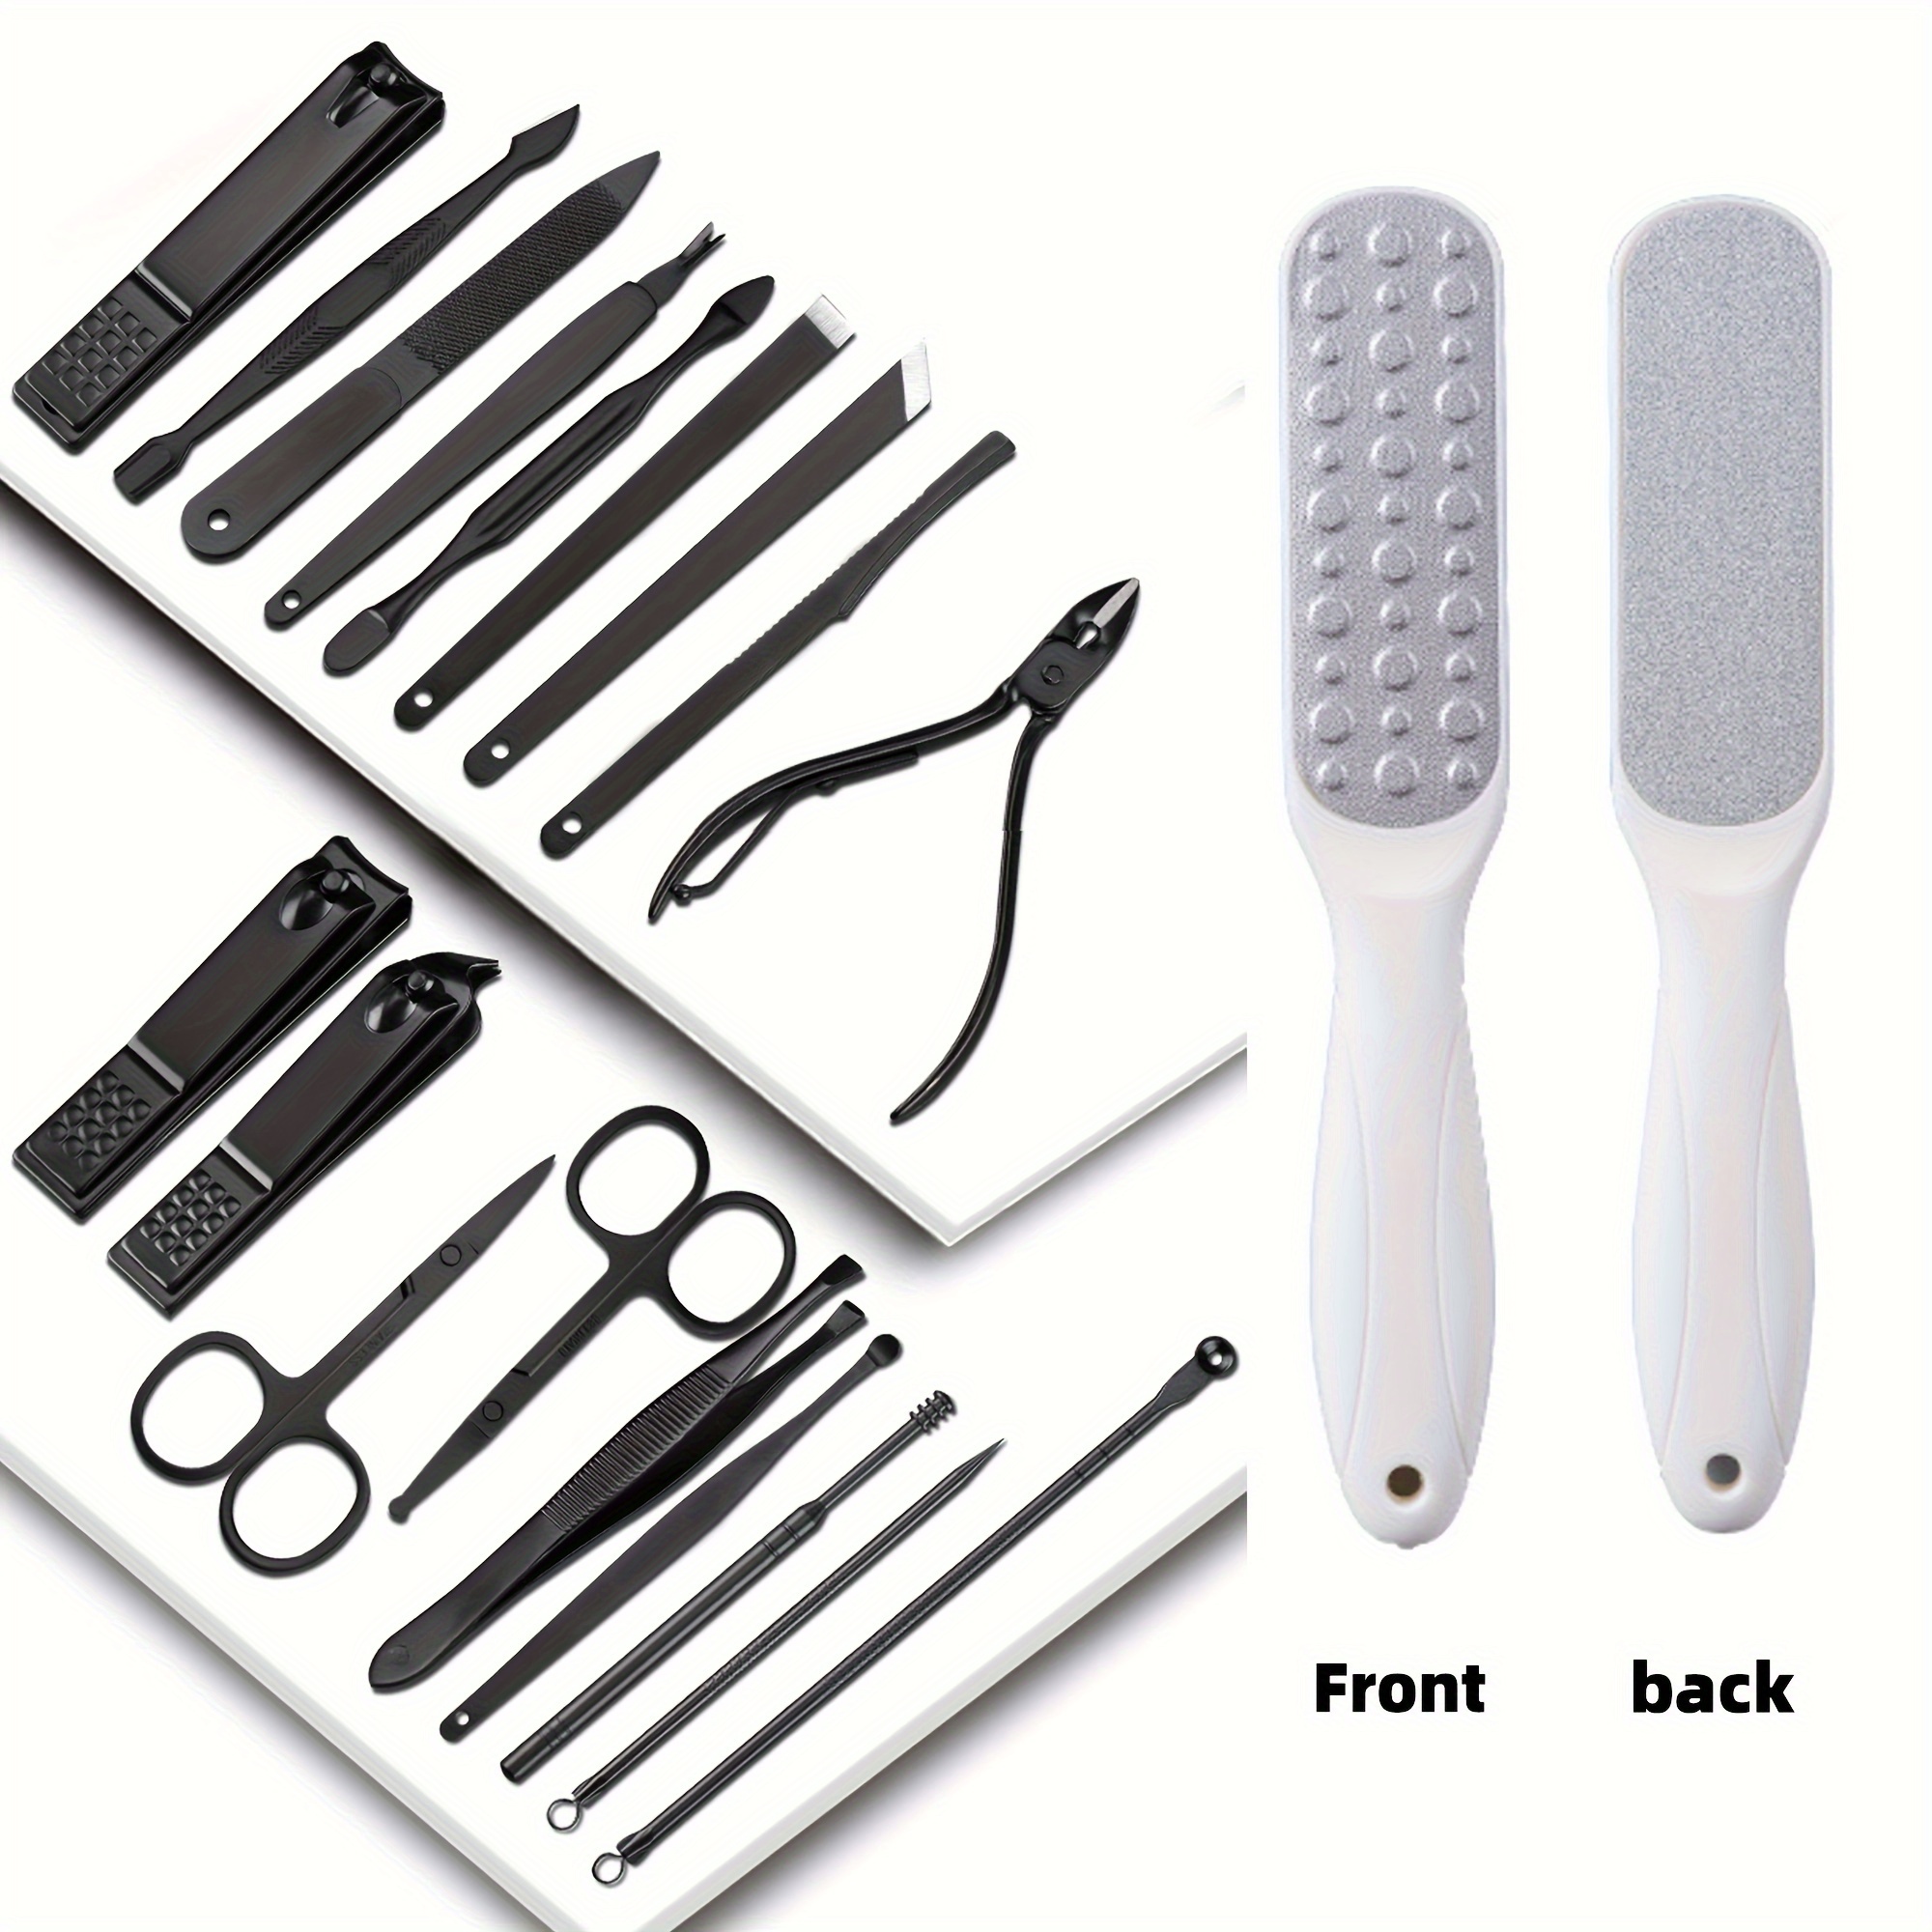  Foot File Callus Remover,Colossal Foot Rasp and Professional  Foot Scrubber Pedicure Kit to Remove Hard Skin for Wet and Dry  Feet,Surgical Grade Stainless Steel File (black and silvery) : Beauty